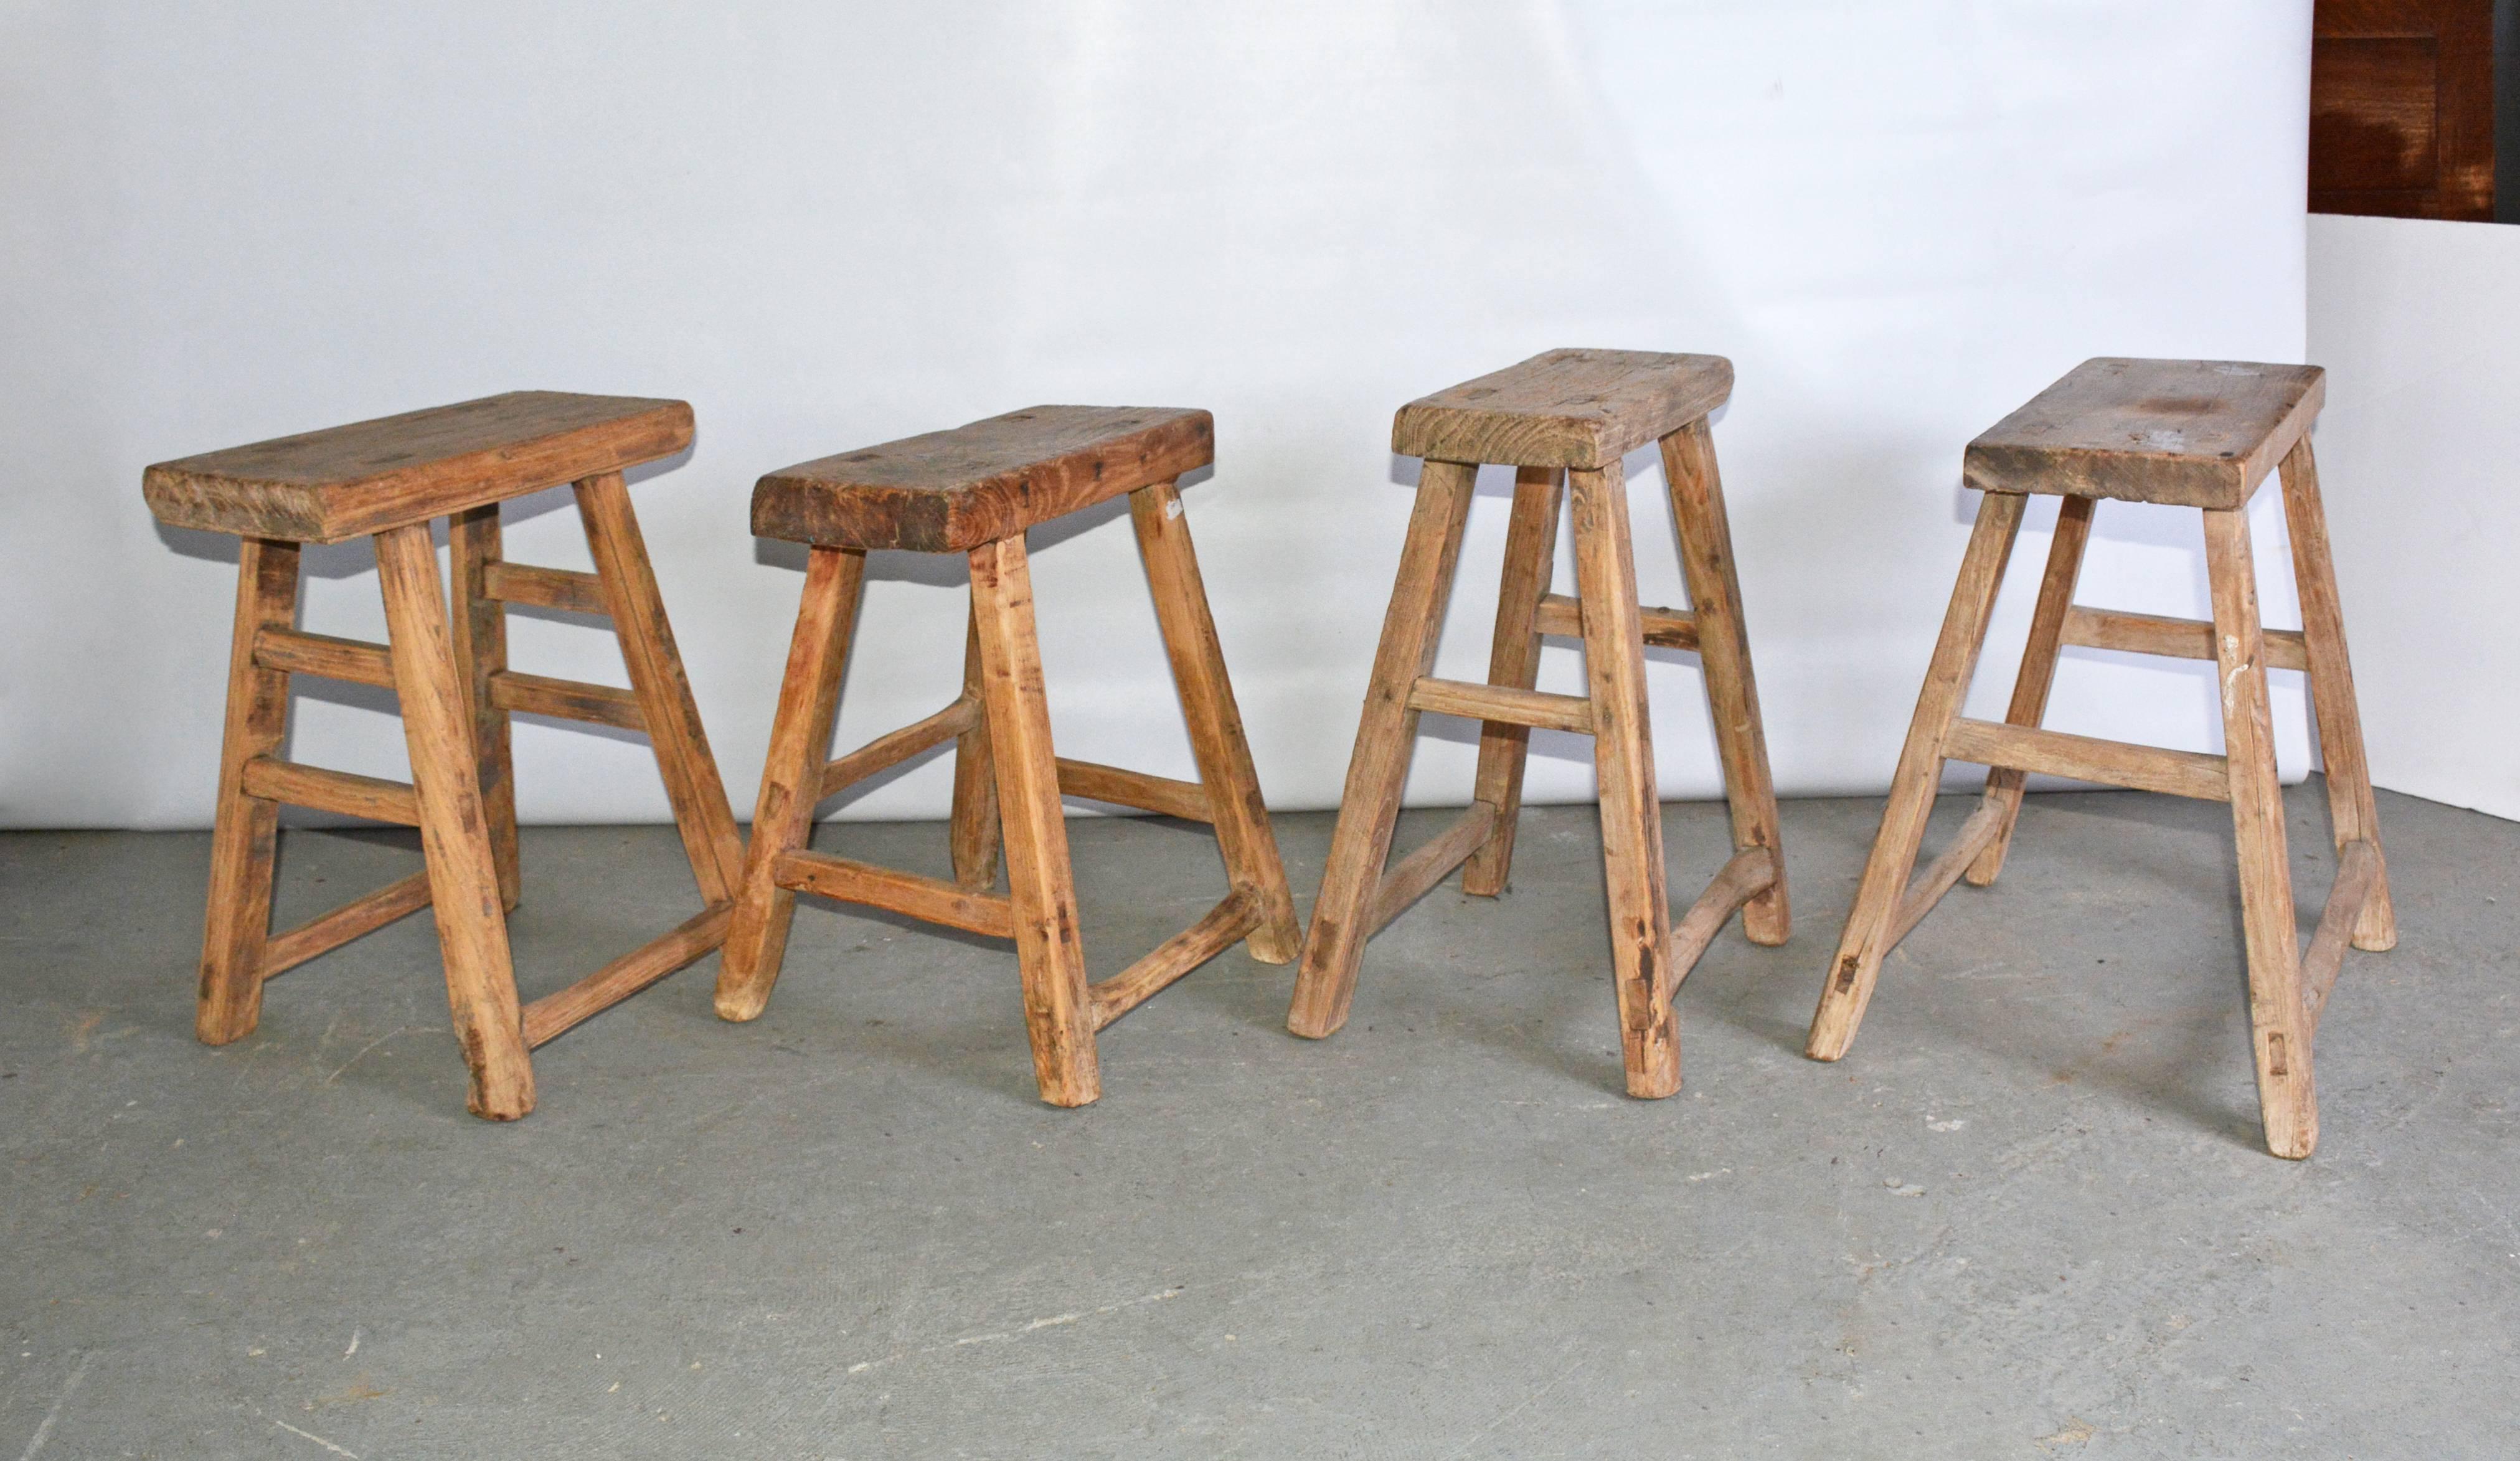 The four rustic Chinese teak stools are crafted with pegged legs that fit into the seats and stretchers that fit into the legs for sturdy construction.
Can be used for side table, end table, or extra seating for dining. Great for porch or patio. 